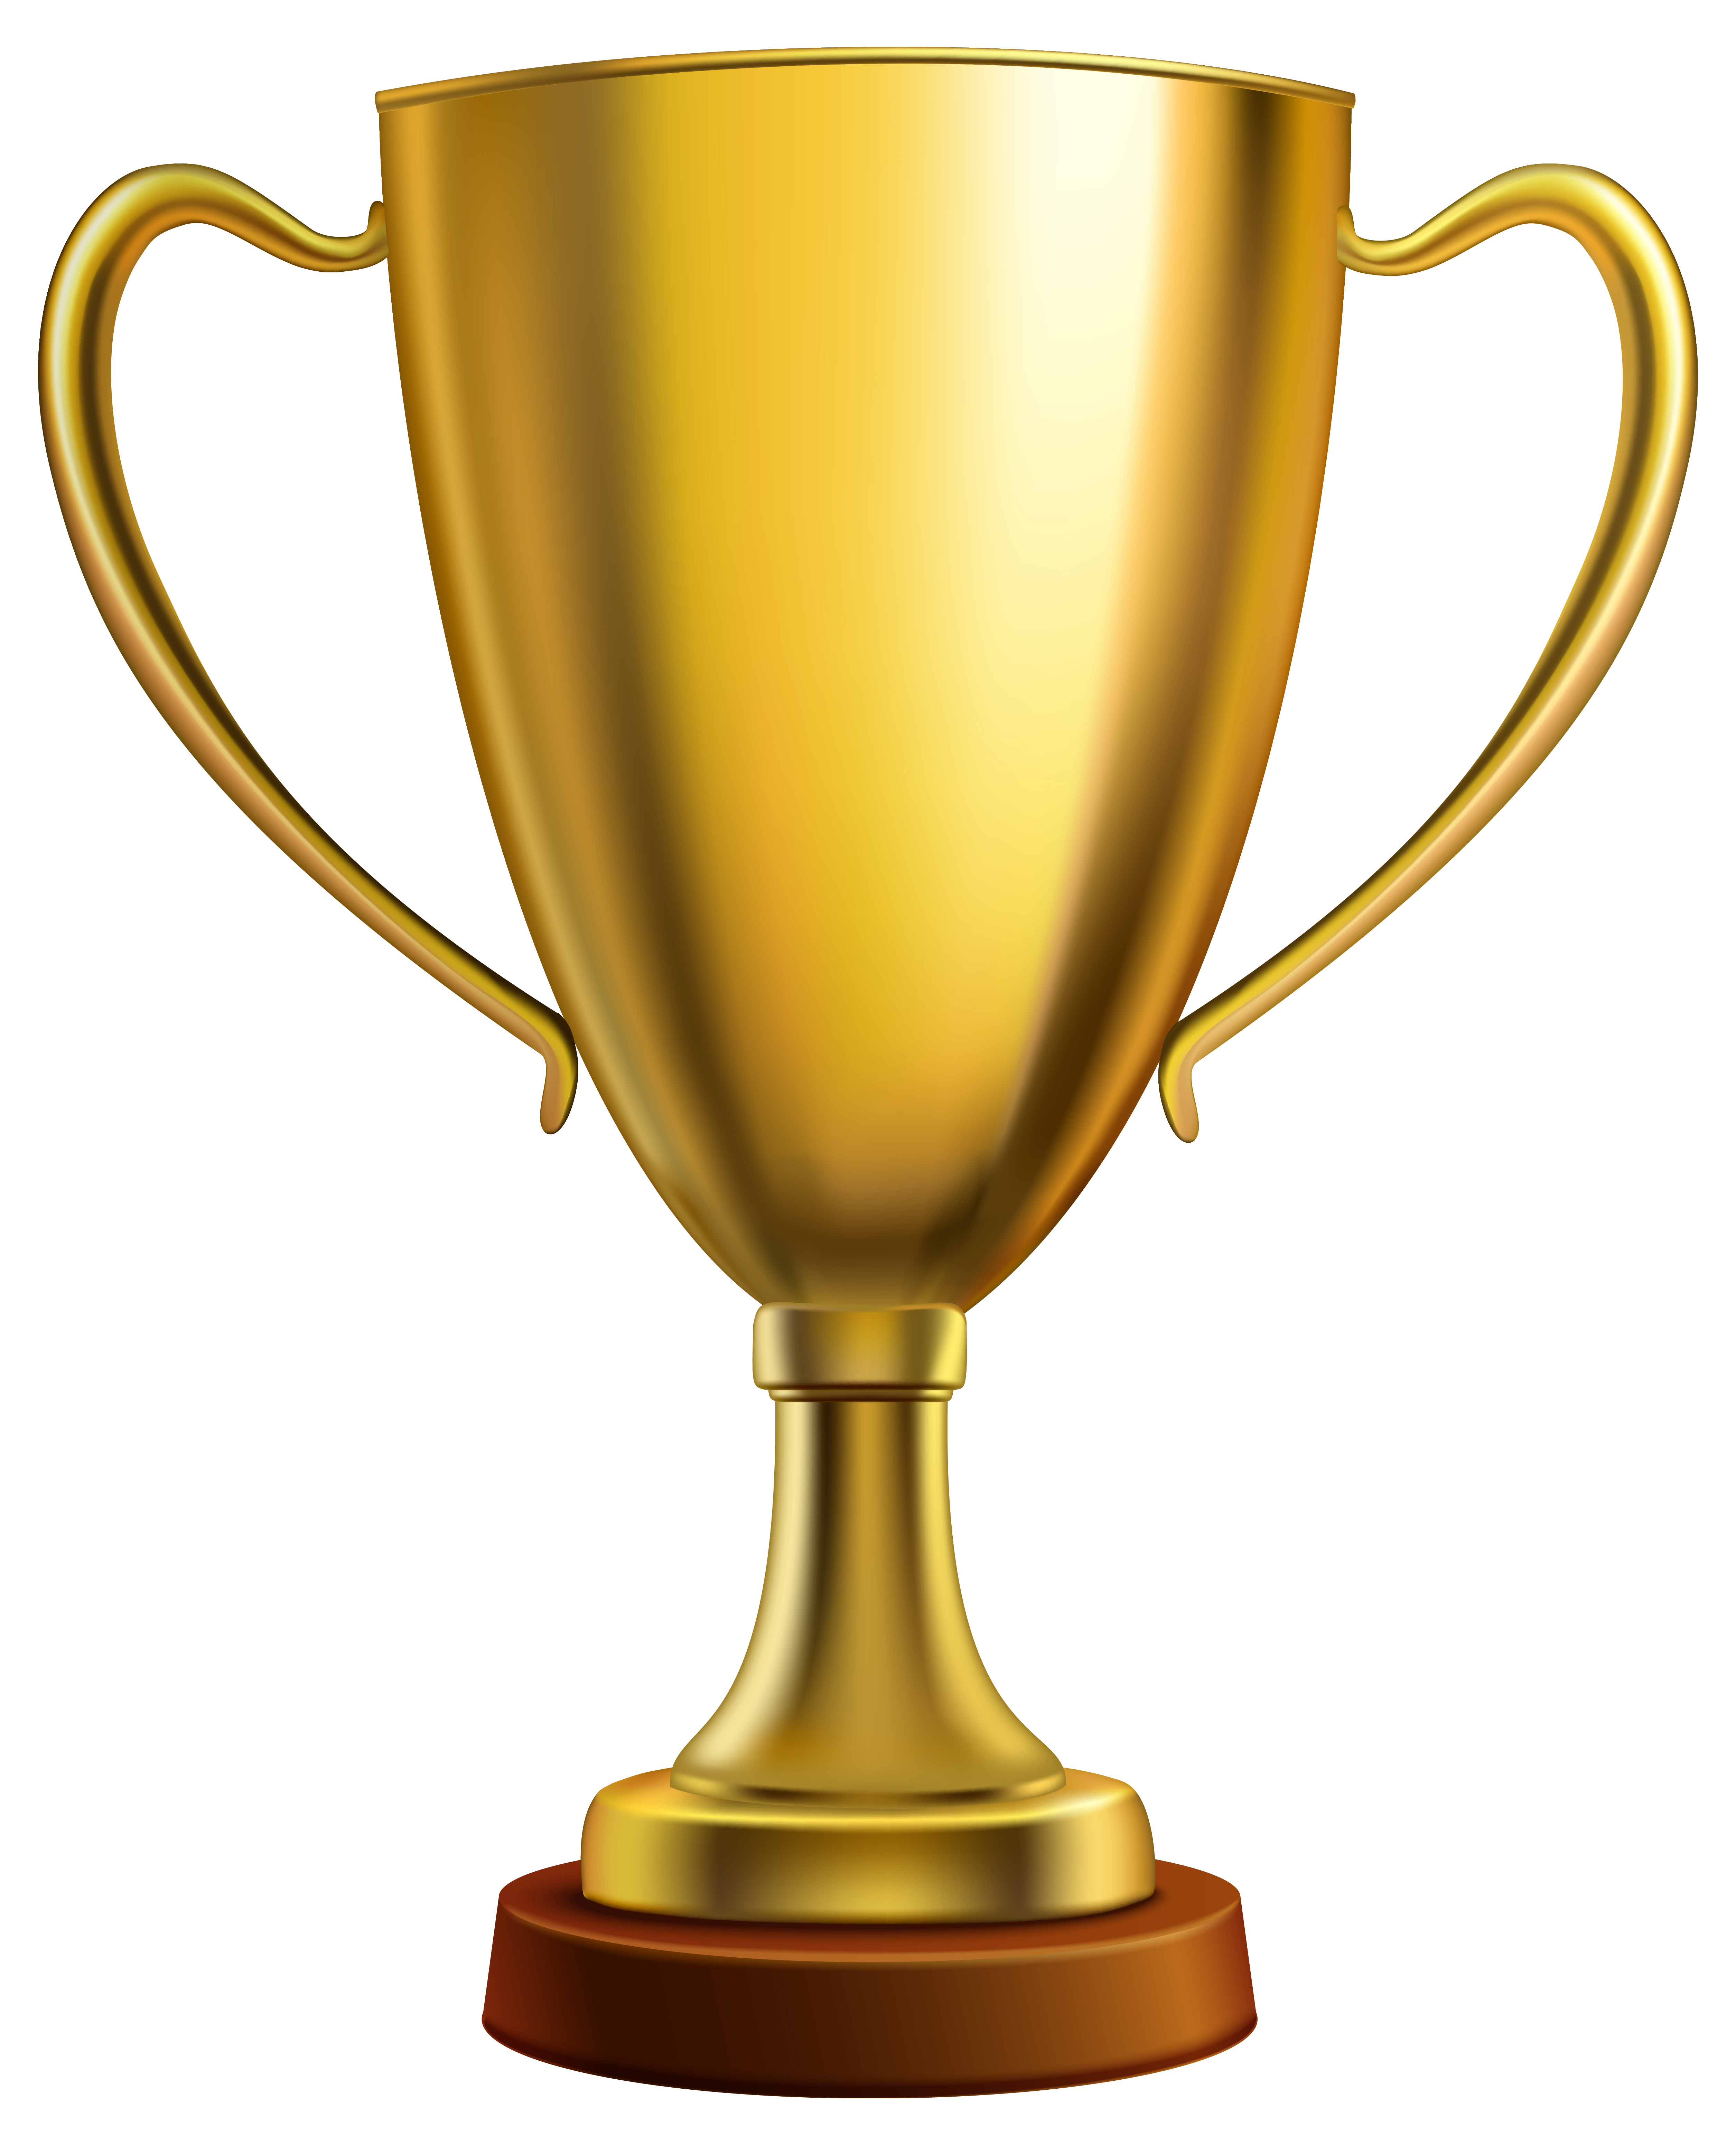 Gold Cup Trophy PNG Clipart Image​ | Gallery Yopriceville - High-Quality  Free Images and Transparent PNG Clipart